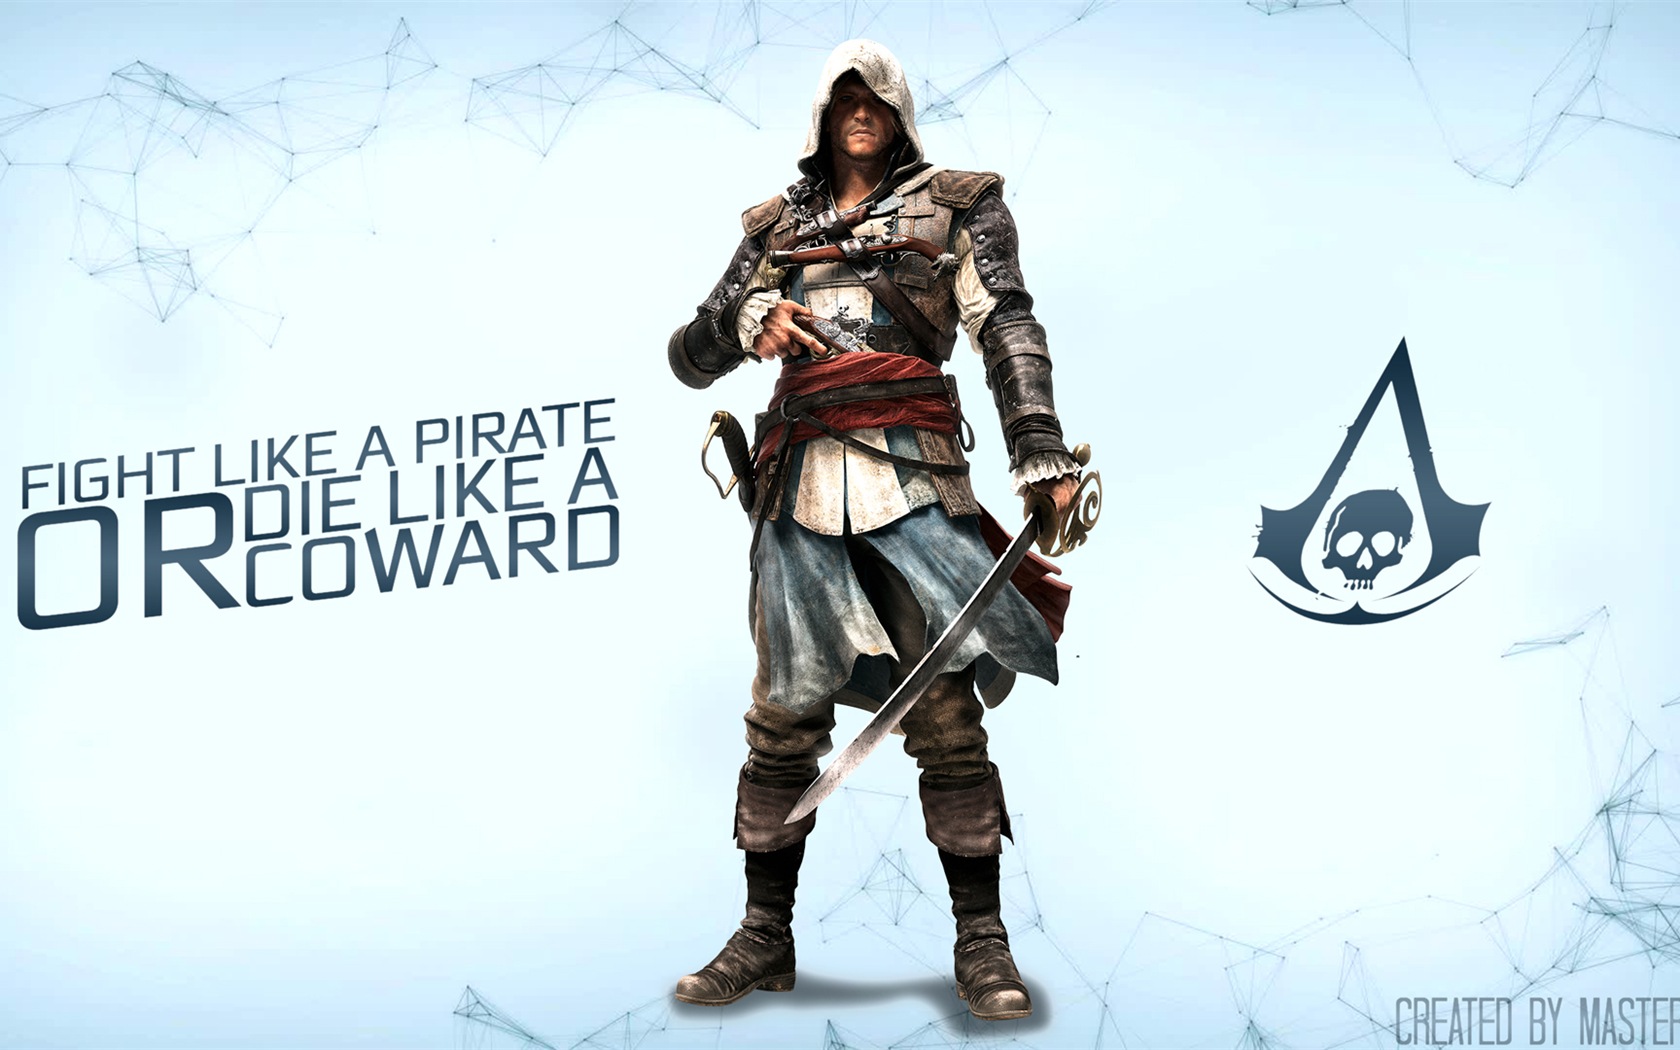 Creed IV Assassin: Black Flag HD wallpapers #3 - 1680x1050